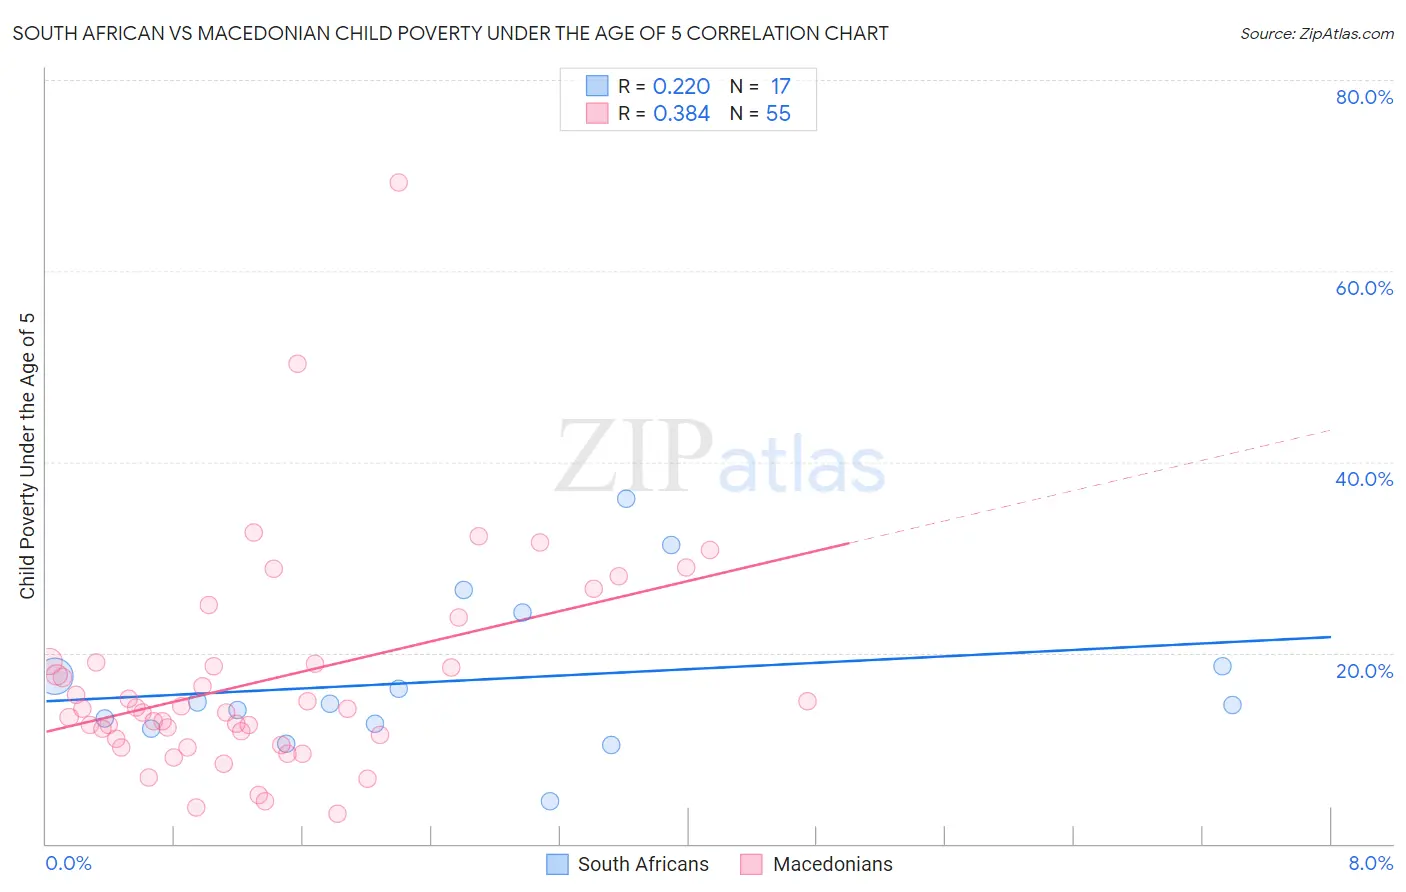 South African vs Macedonian Child Poverty Under the Age of 5